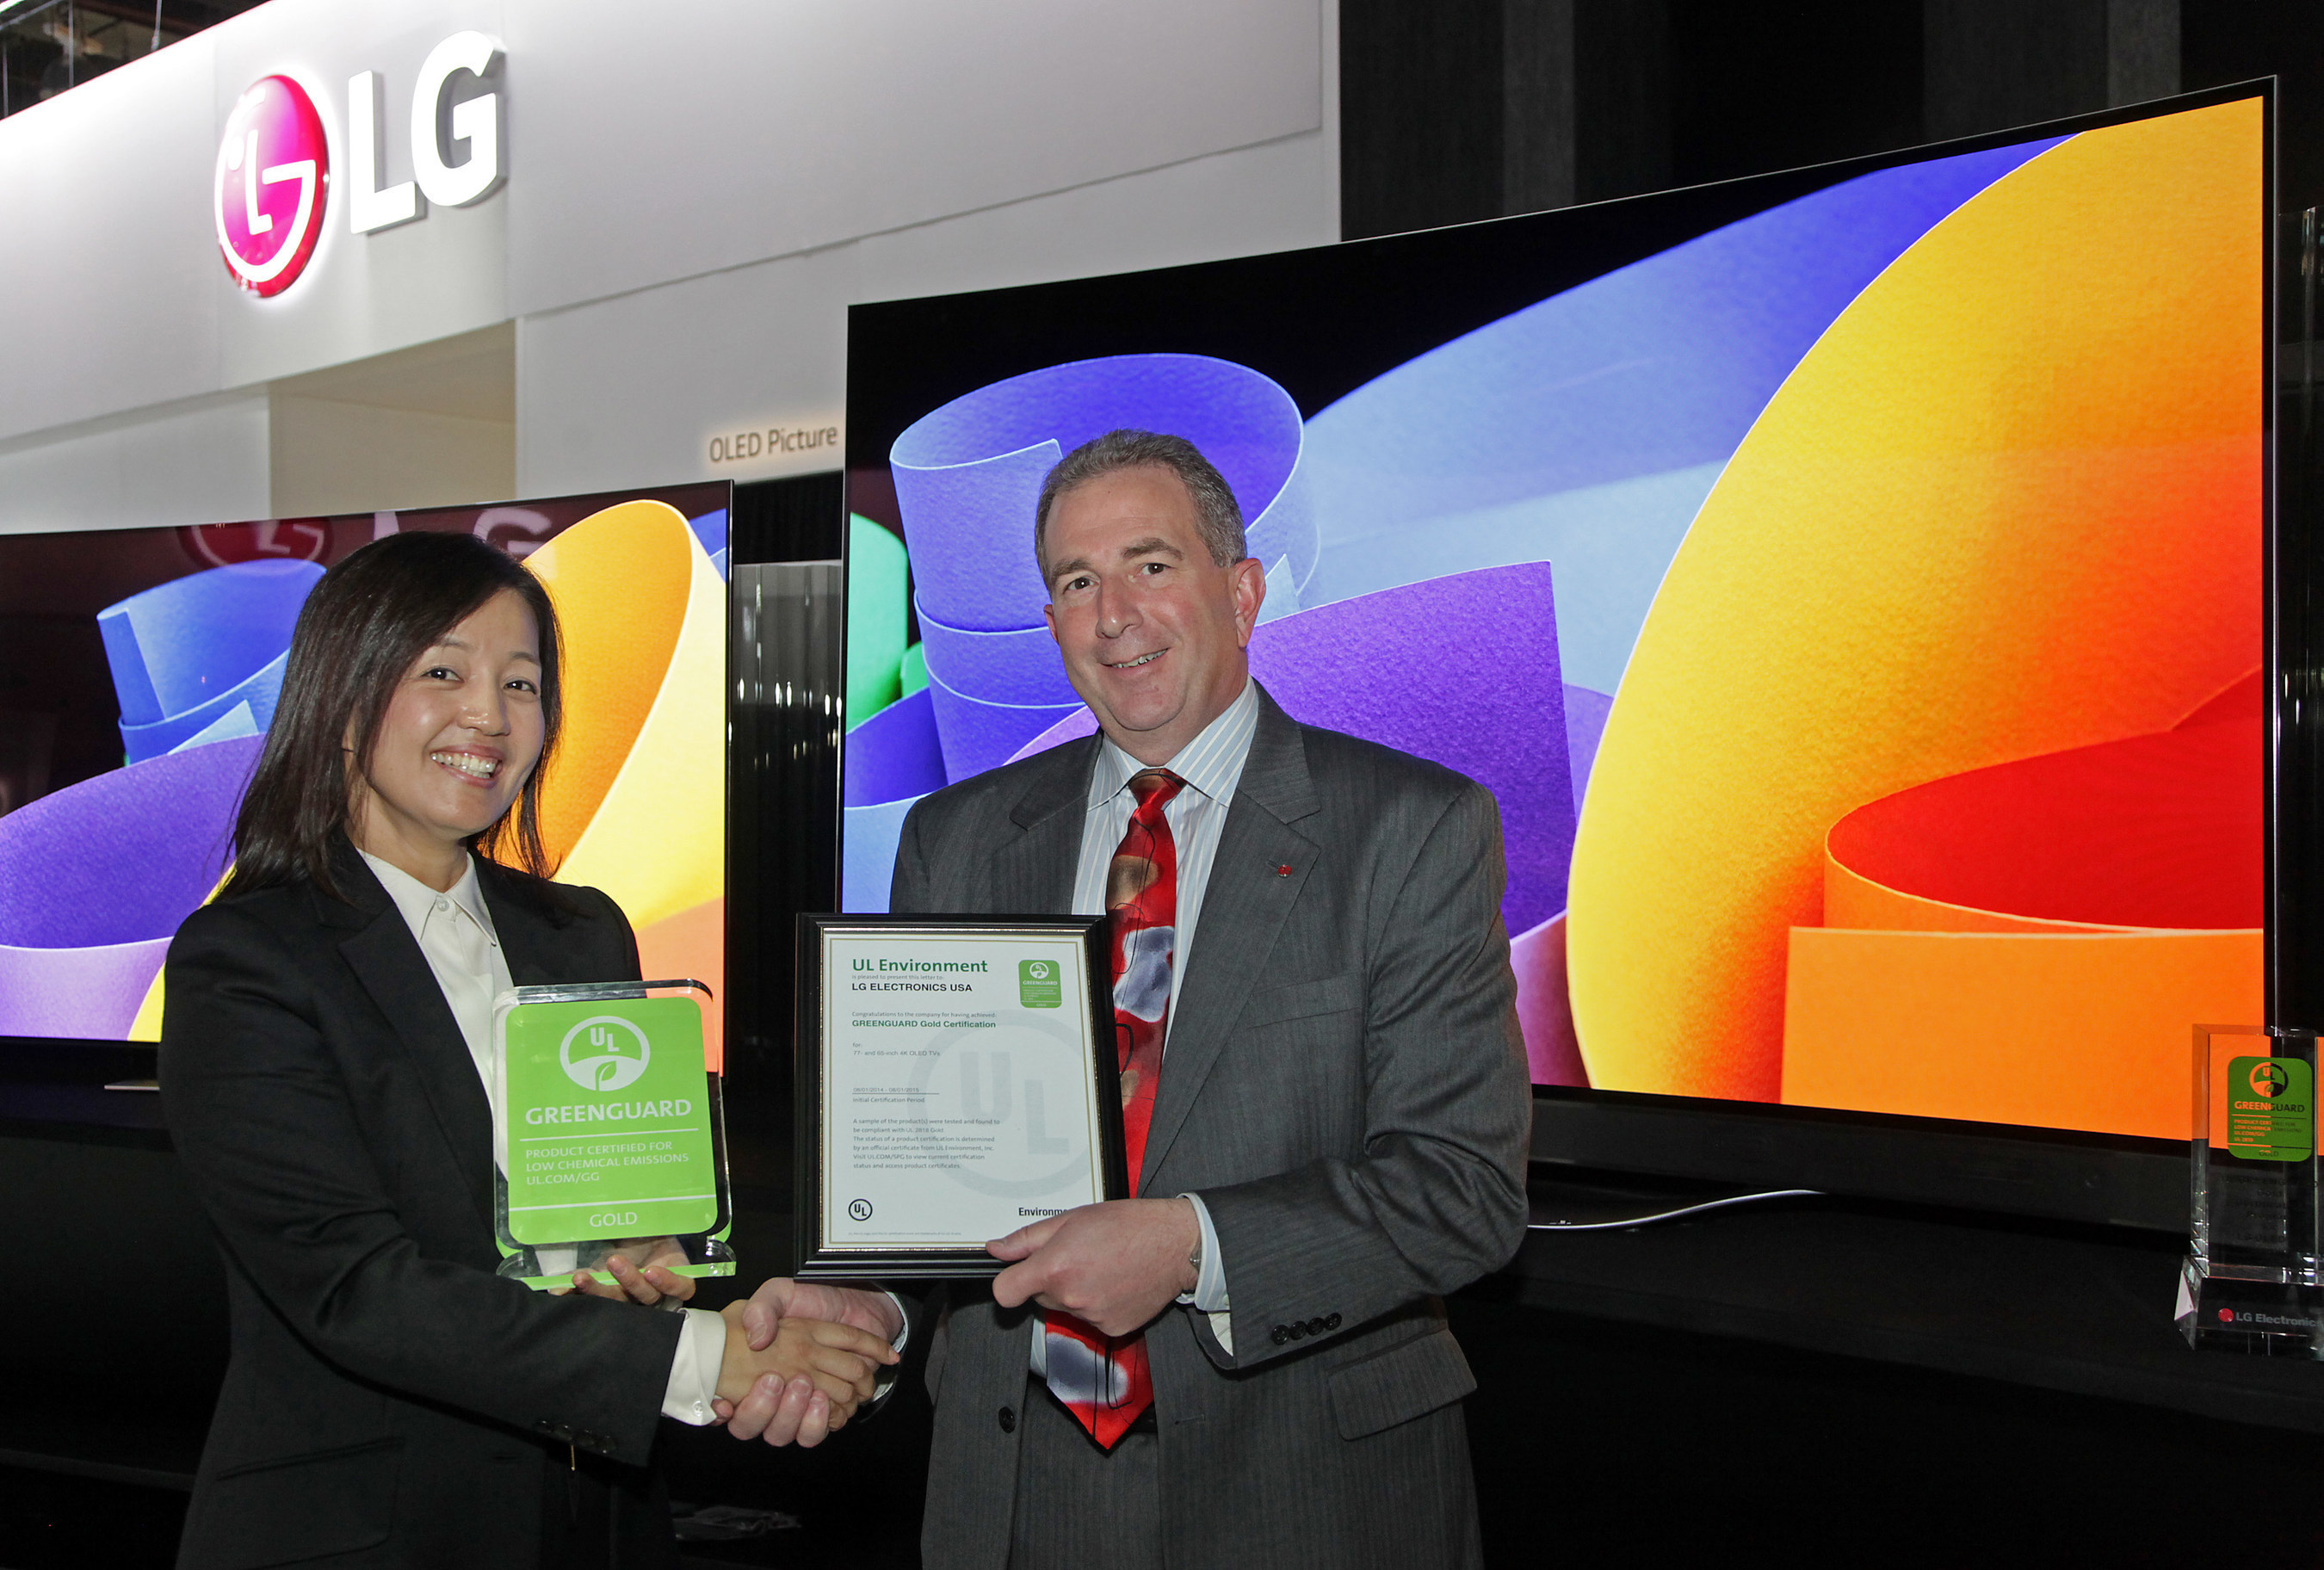 LG Electronics USA and UL Environment announced that LG's new 55-, 65- and 77-inch class 4K Ultra HD OLED TVs have received the coveted GREENGUARD Certification, which sets a new precedent for television manufacturers to help create healthier indoor environments. At an award ceremony at the 2015 International CES are Jamie Yeom, Global Account Director, Business Development & Marketing, UL Korea Ltd., and Tim Alessi, LG's U.S. Head of New Product Development.